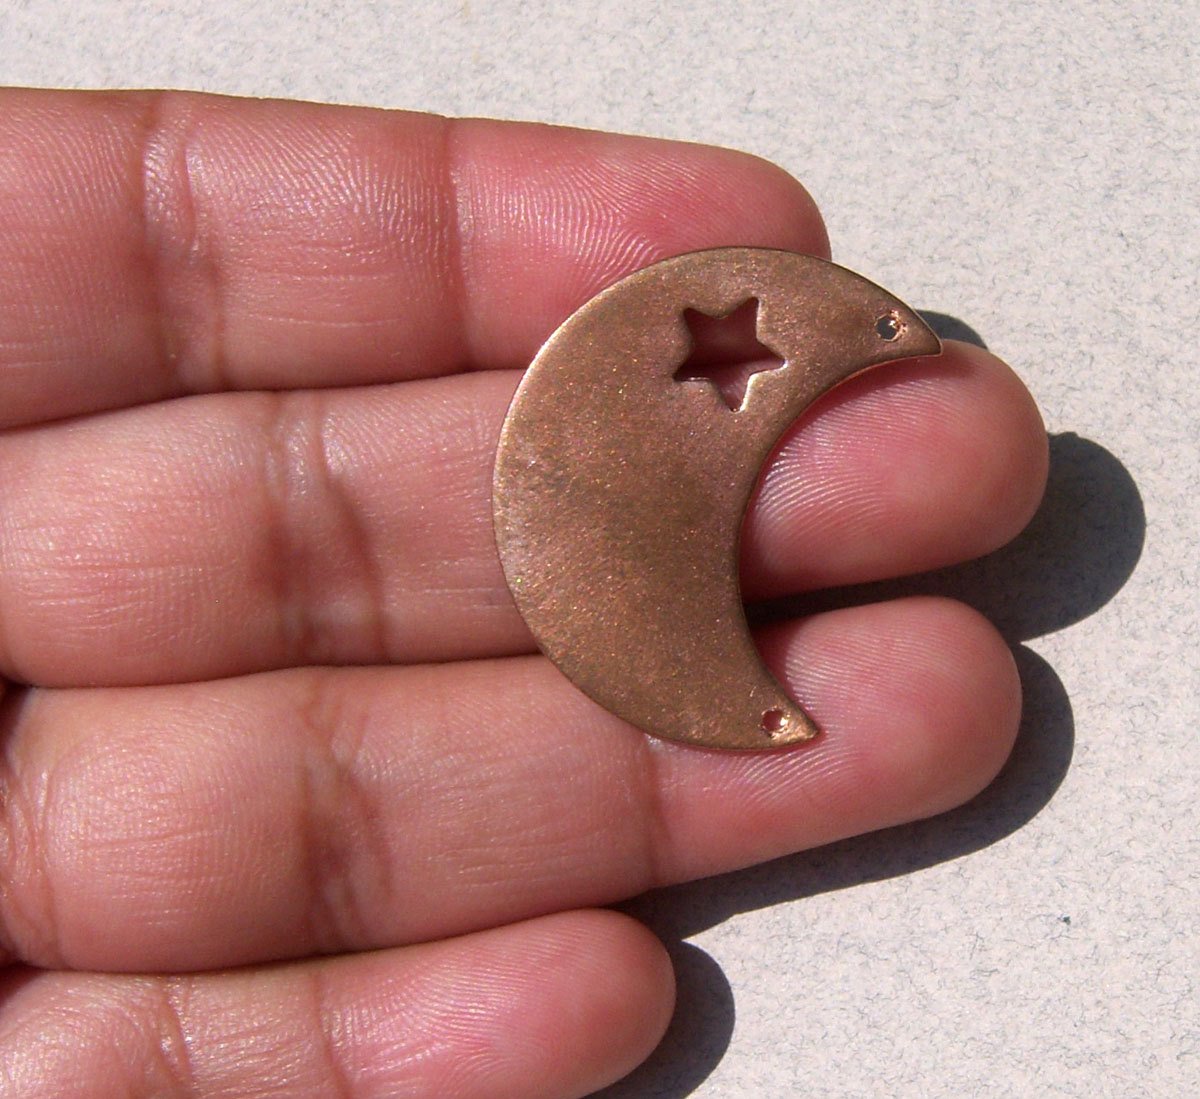 Copper or Brass or Bronze or Nickel Silver Moon 24g 29mm x 22.5mm with Star with holes-Blanks Cutout for Enameling Stamping Texturing